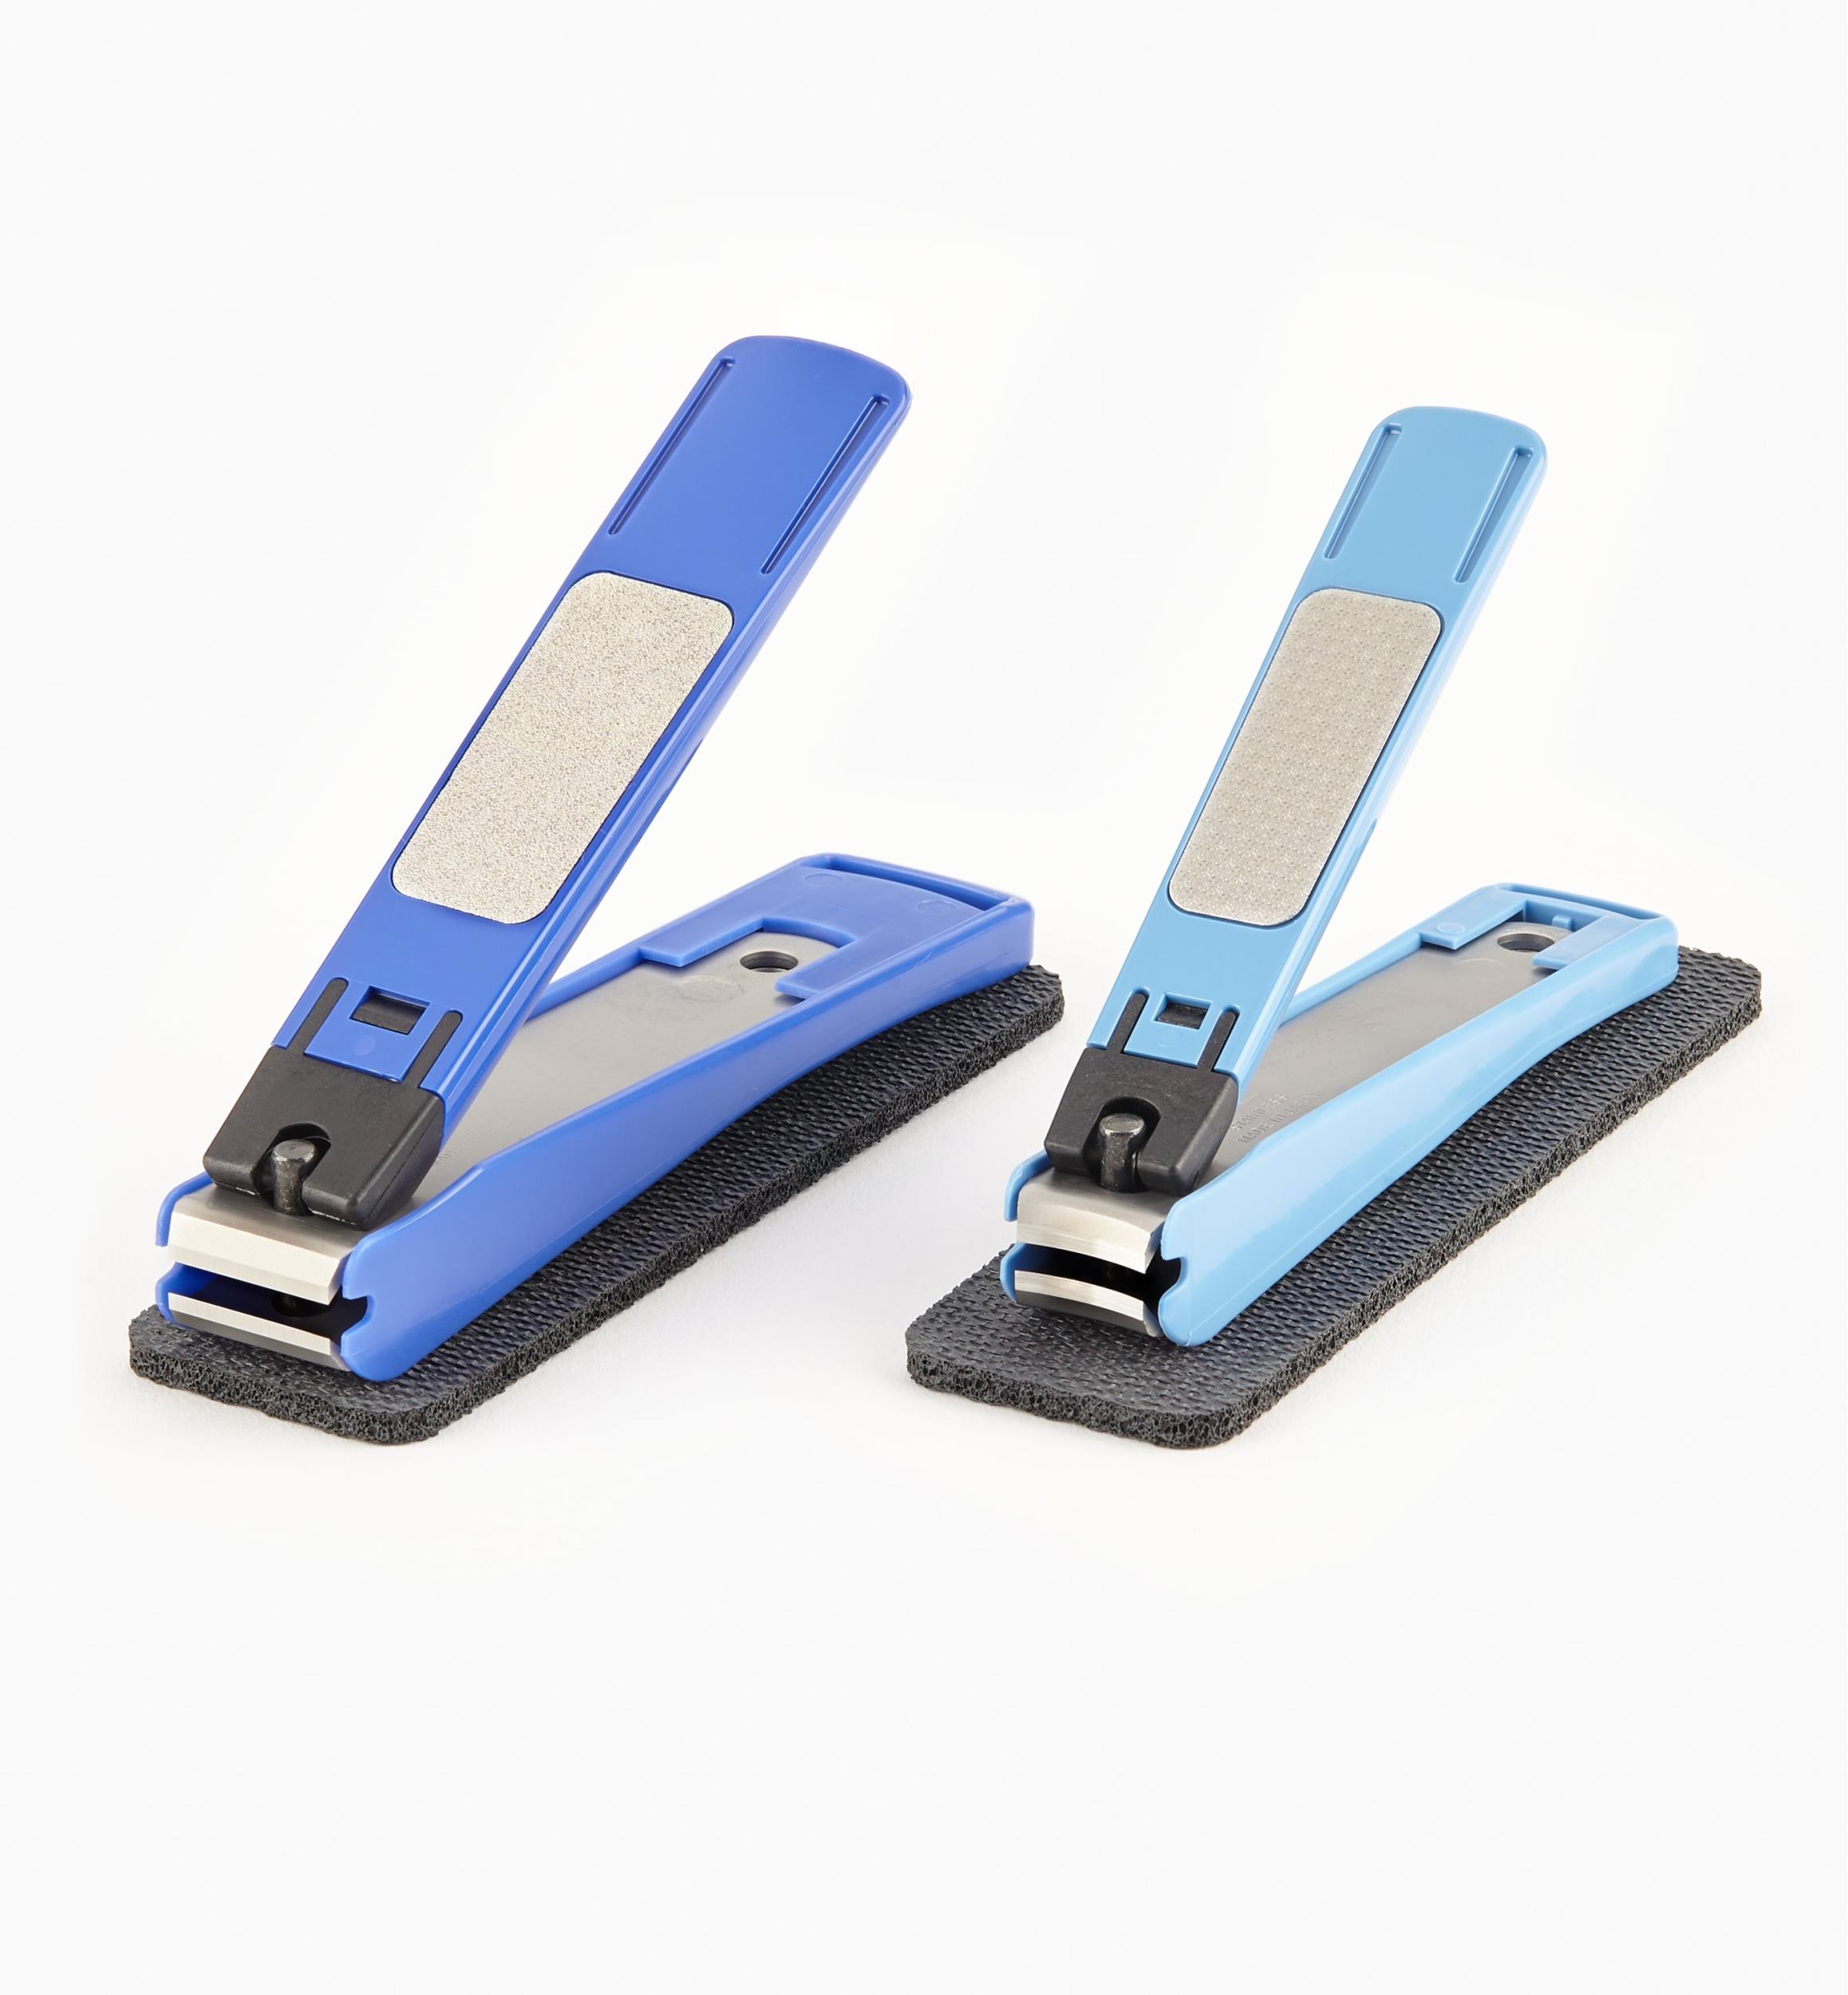 https://assets.leevalley.com/Size5/10030/09A0623-fingernail-and-toenail-clippers-set-of-2-f-01.jpg